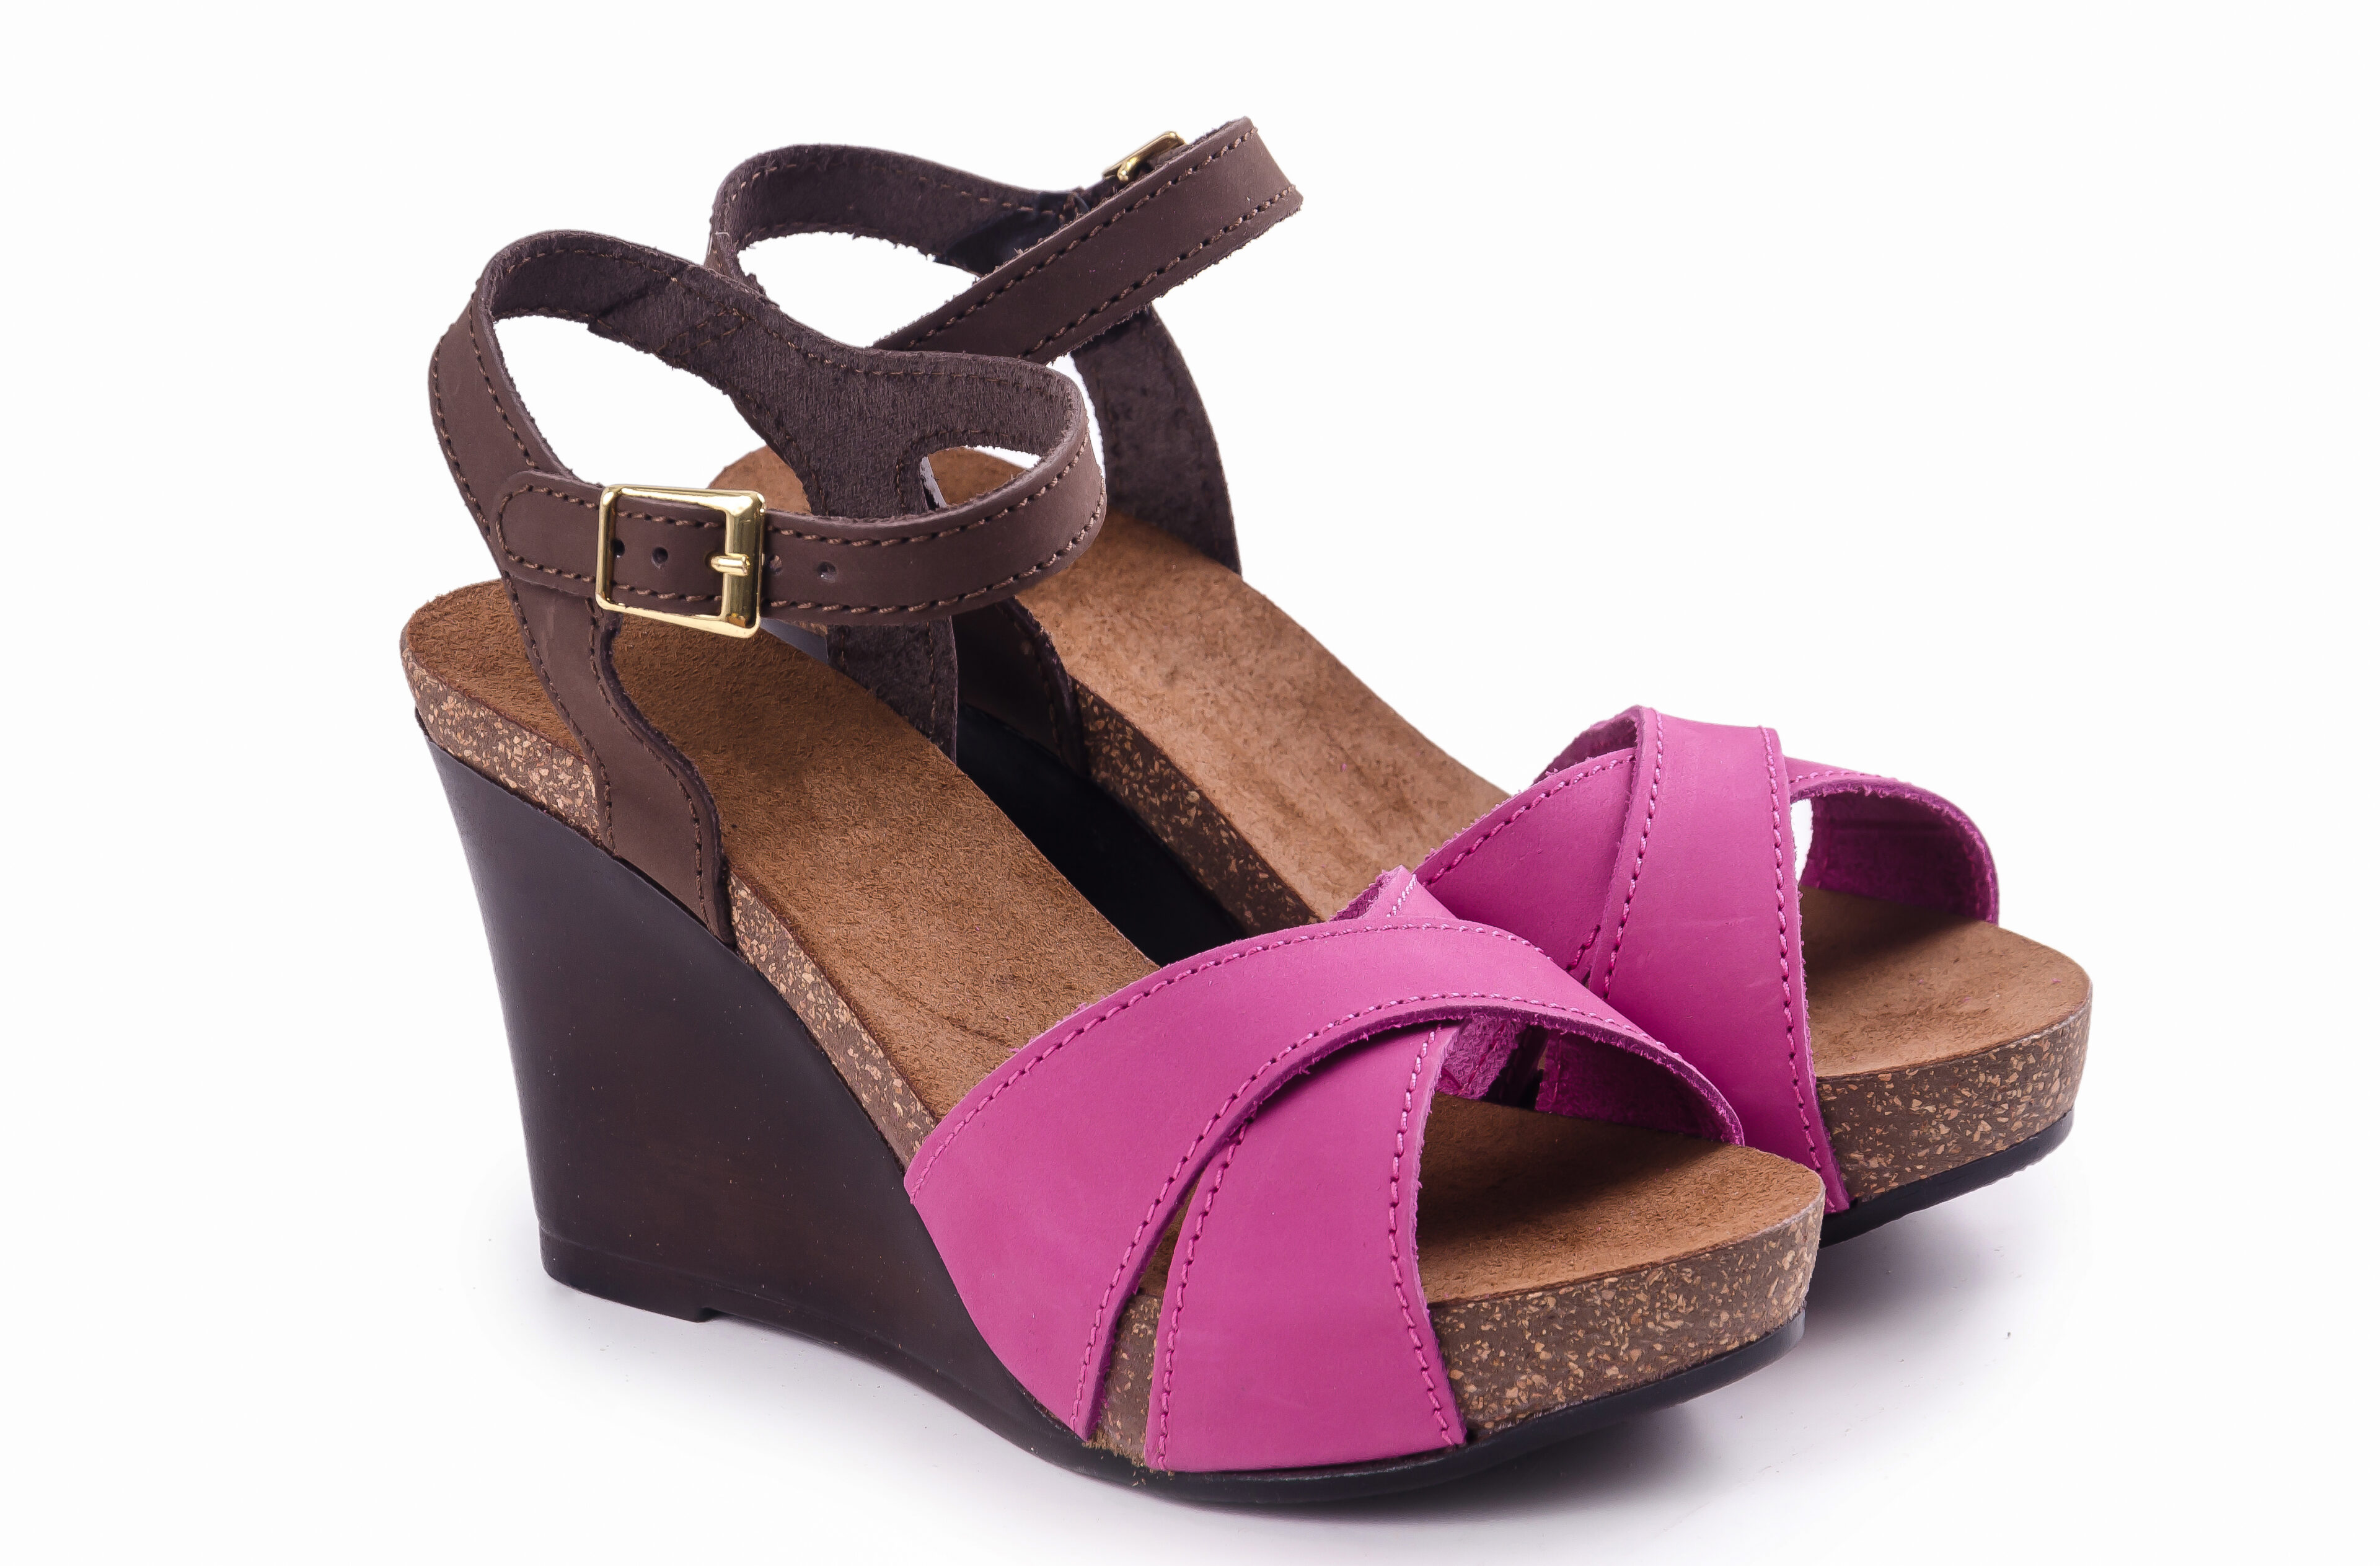 Leather Sandals, Brown and Purple, on a High Wedge